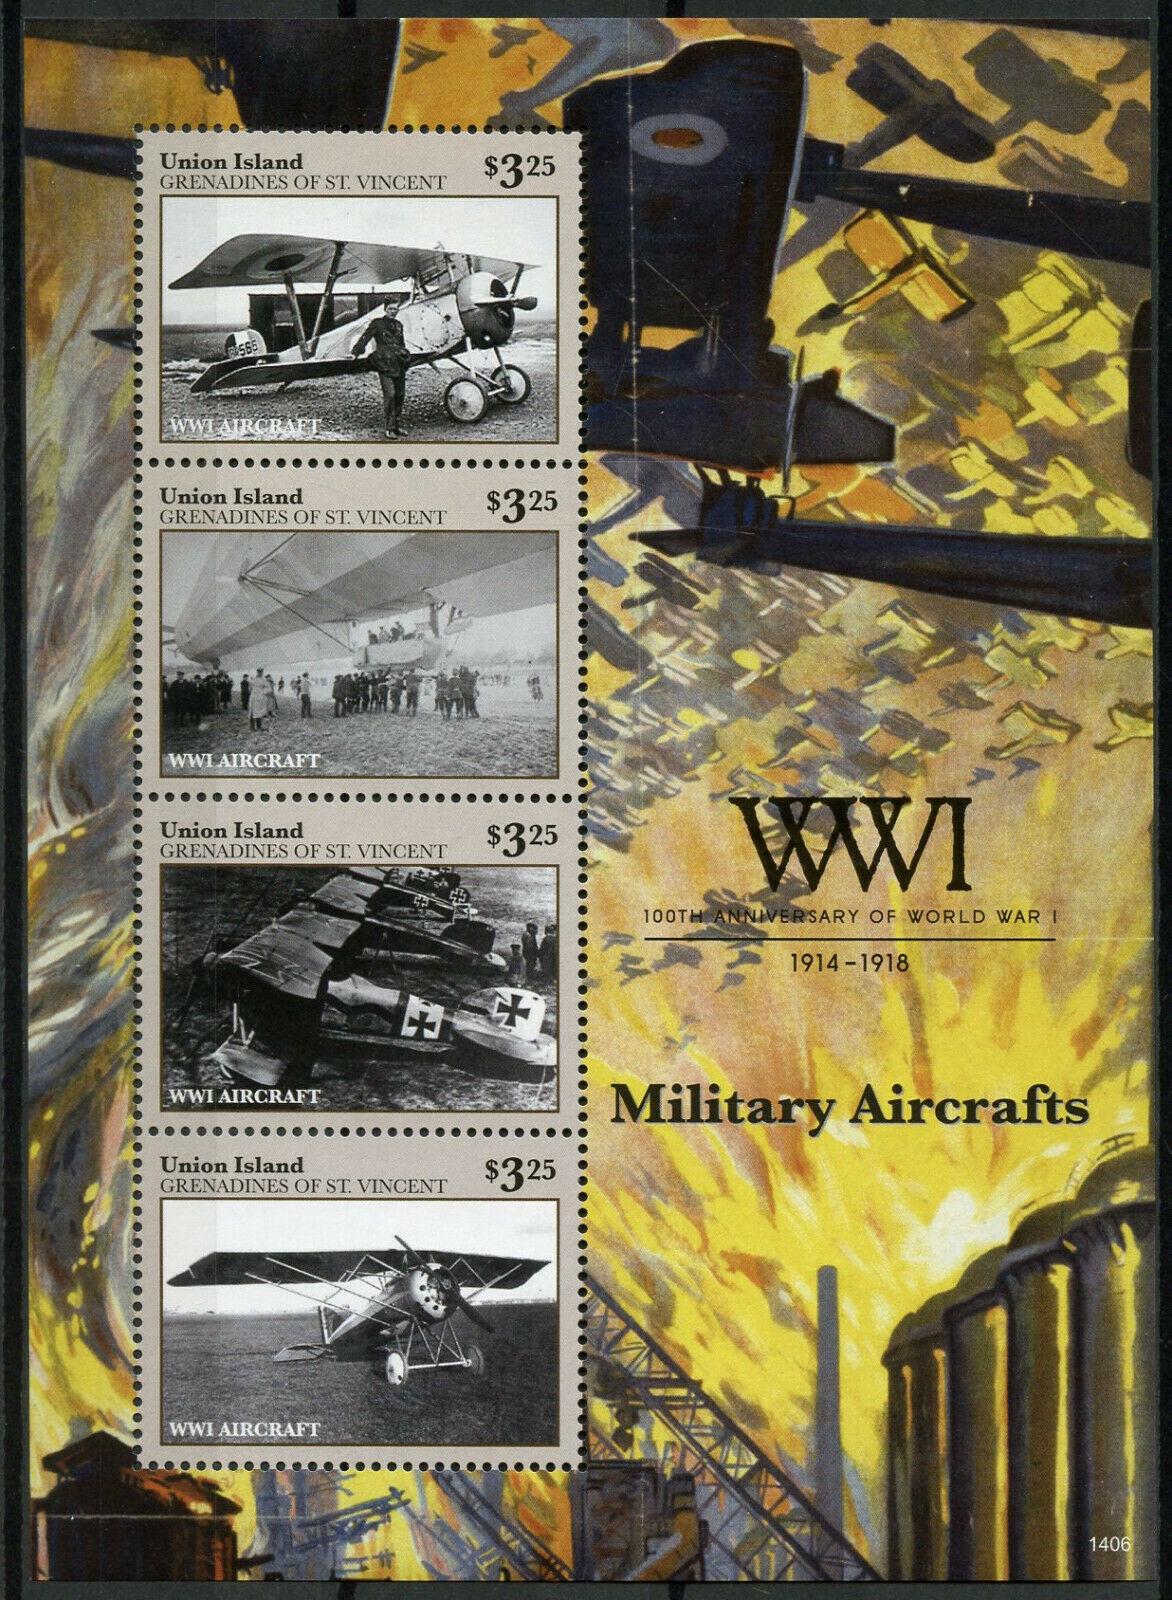 Union Island Gren St Vincent 2014 MNH WWI WW1 Military Aircrafts 4v M/S Stamps